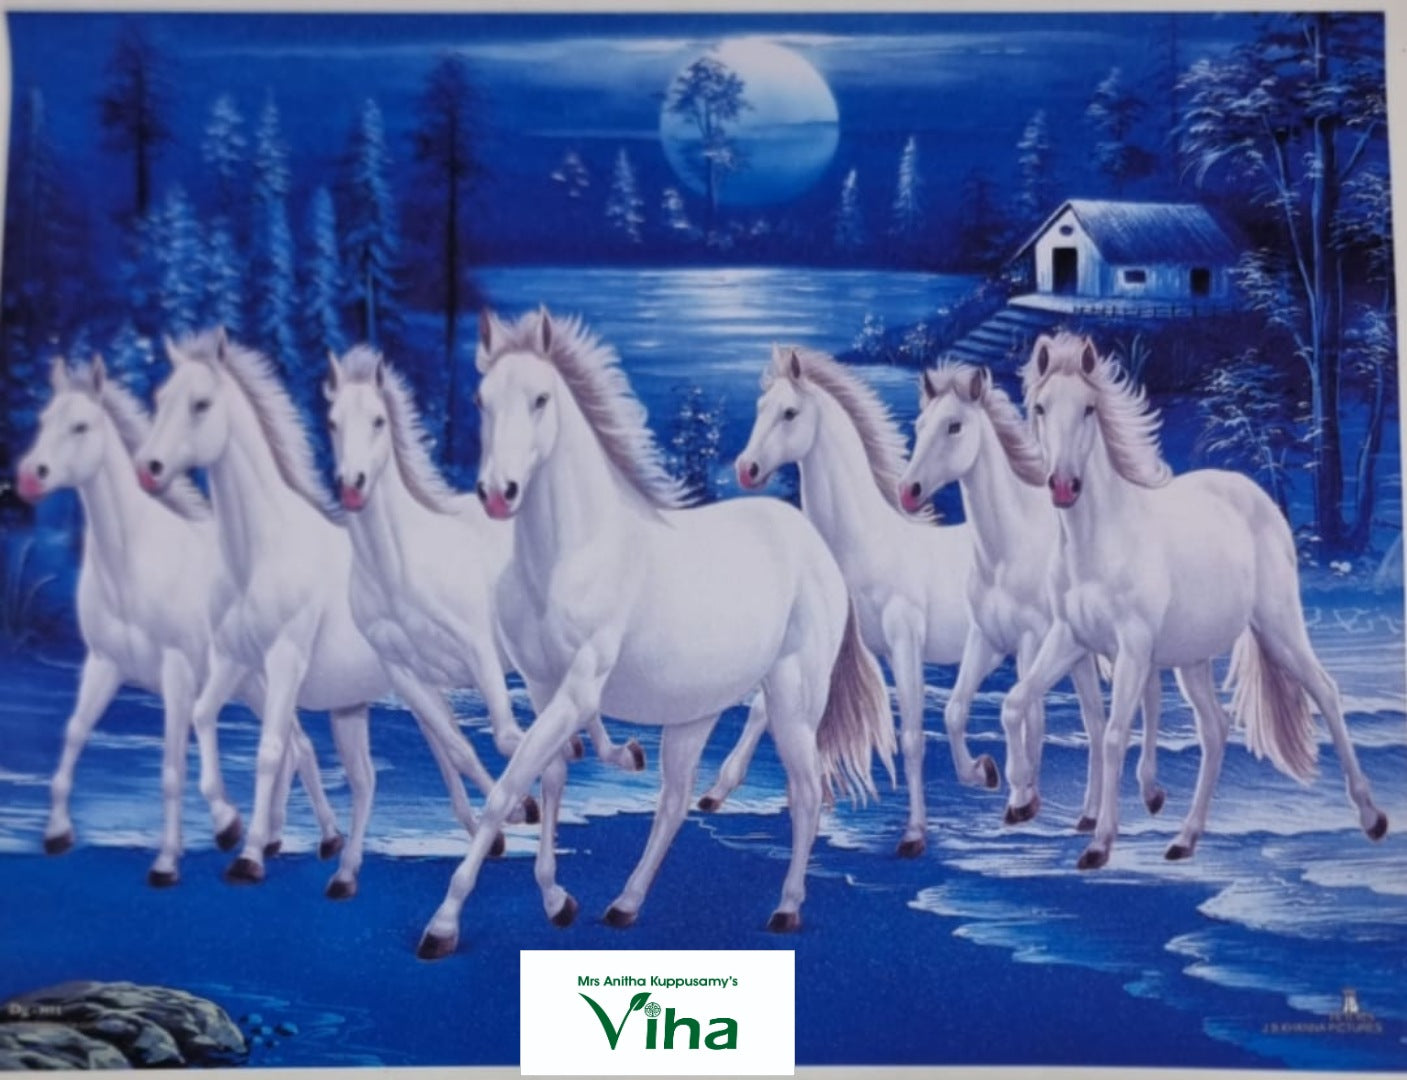 7 White Horse - 7 horse Wallpaper Download | MobCup